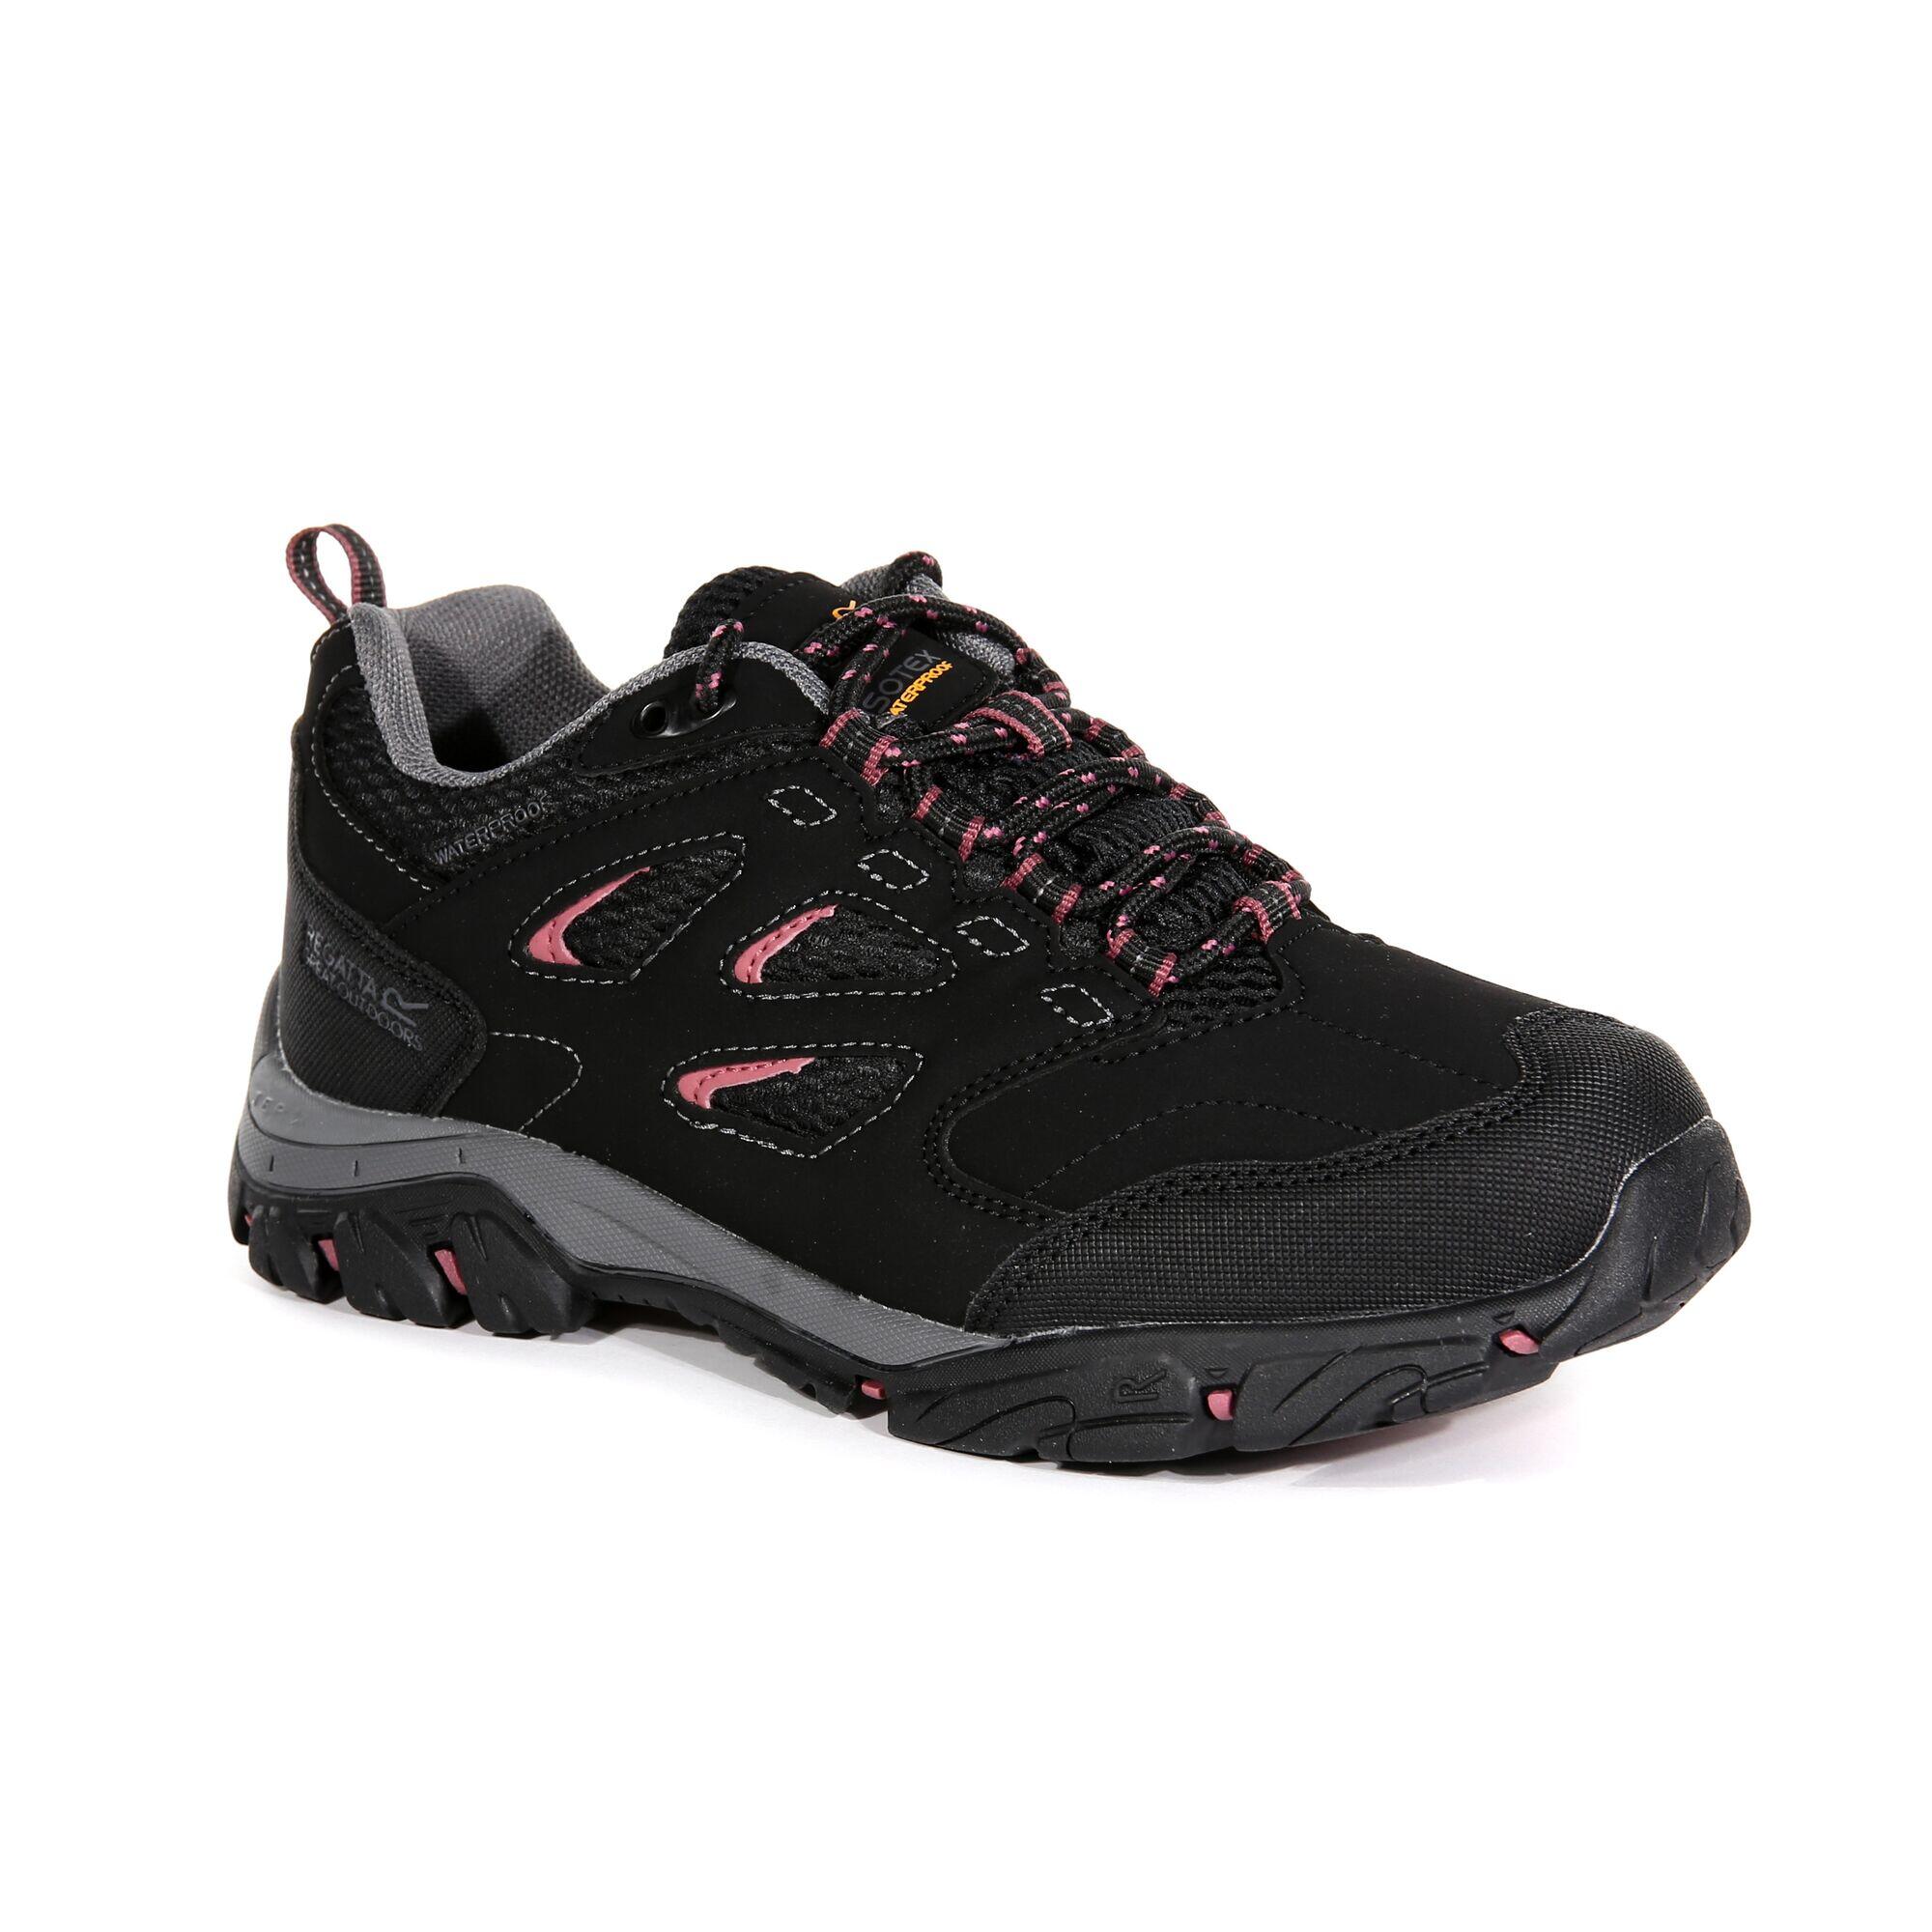 Lady Holcombe IEP Low Women's Hiking Boots - Black / Rose 2/5